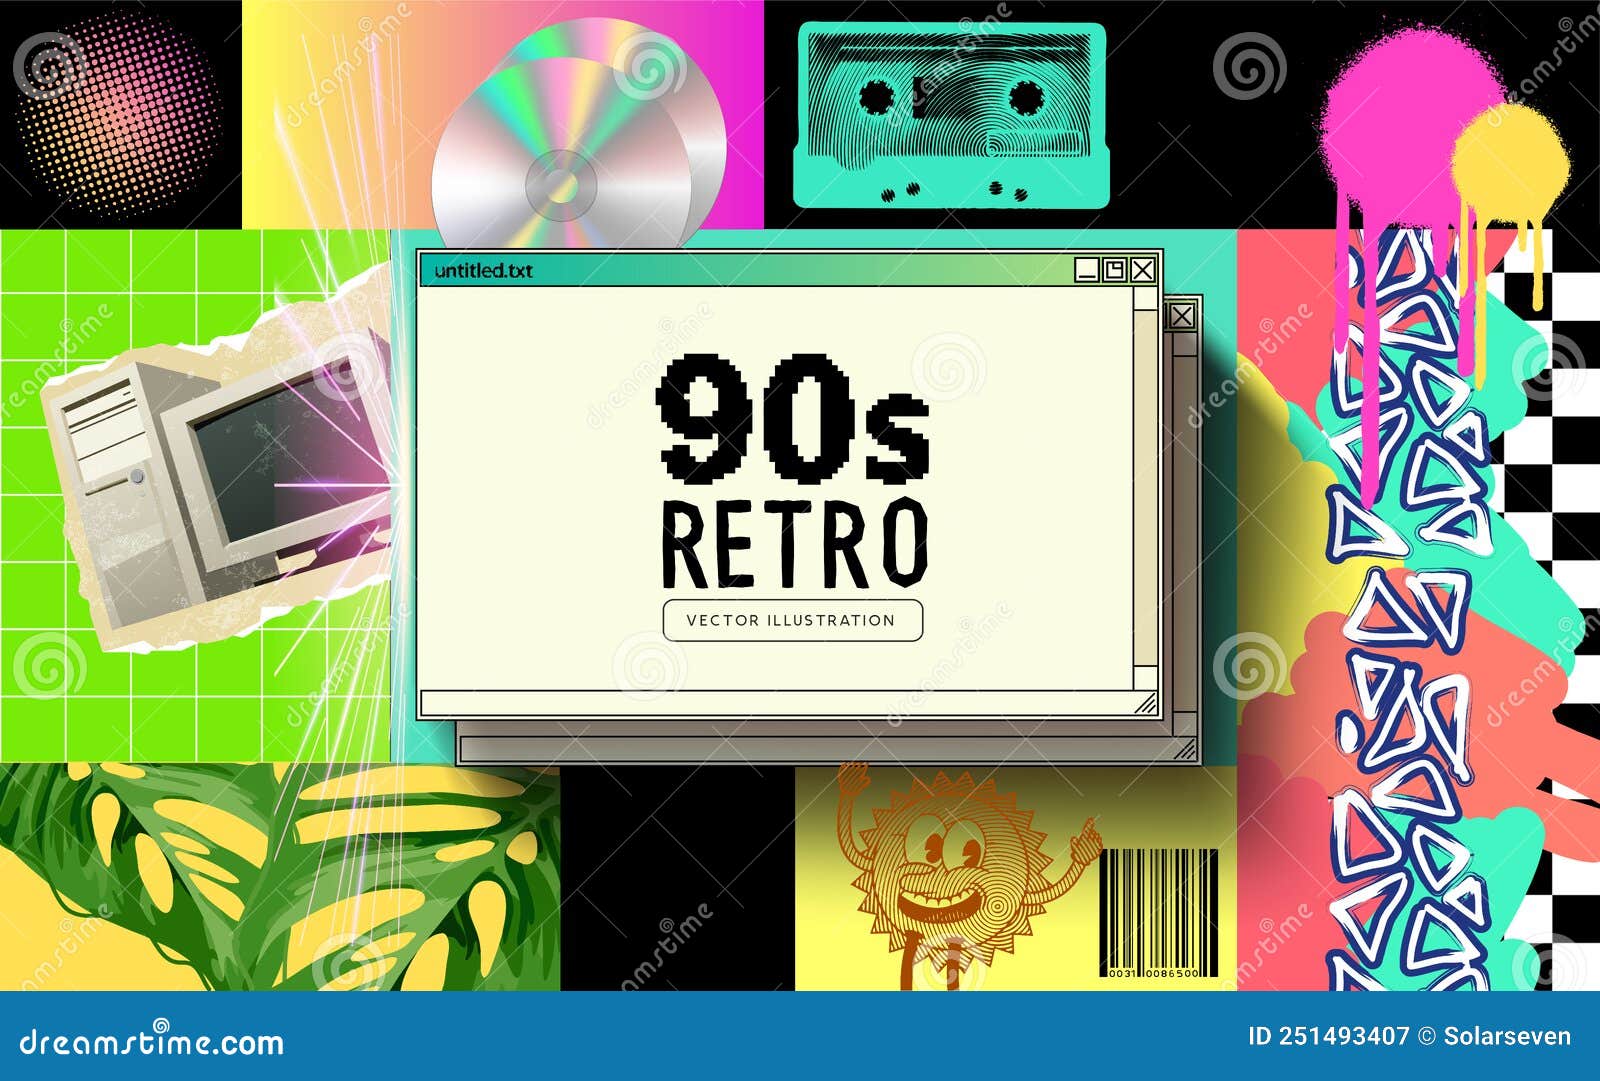 retro iconic 90s textures and objects background